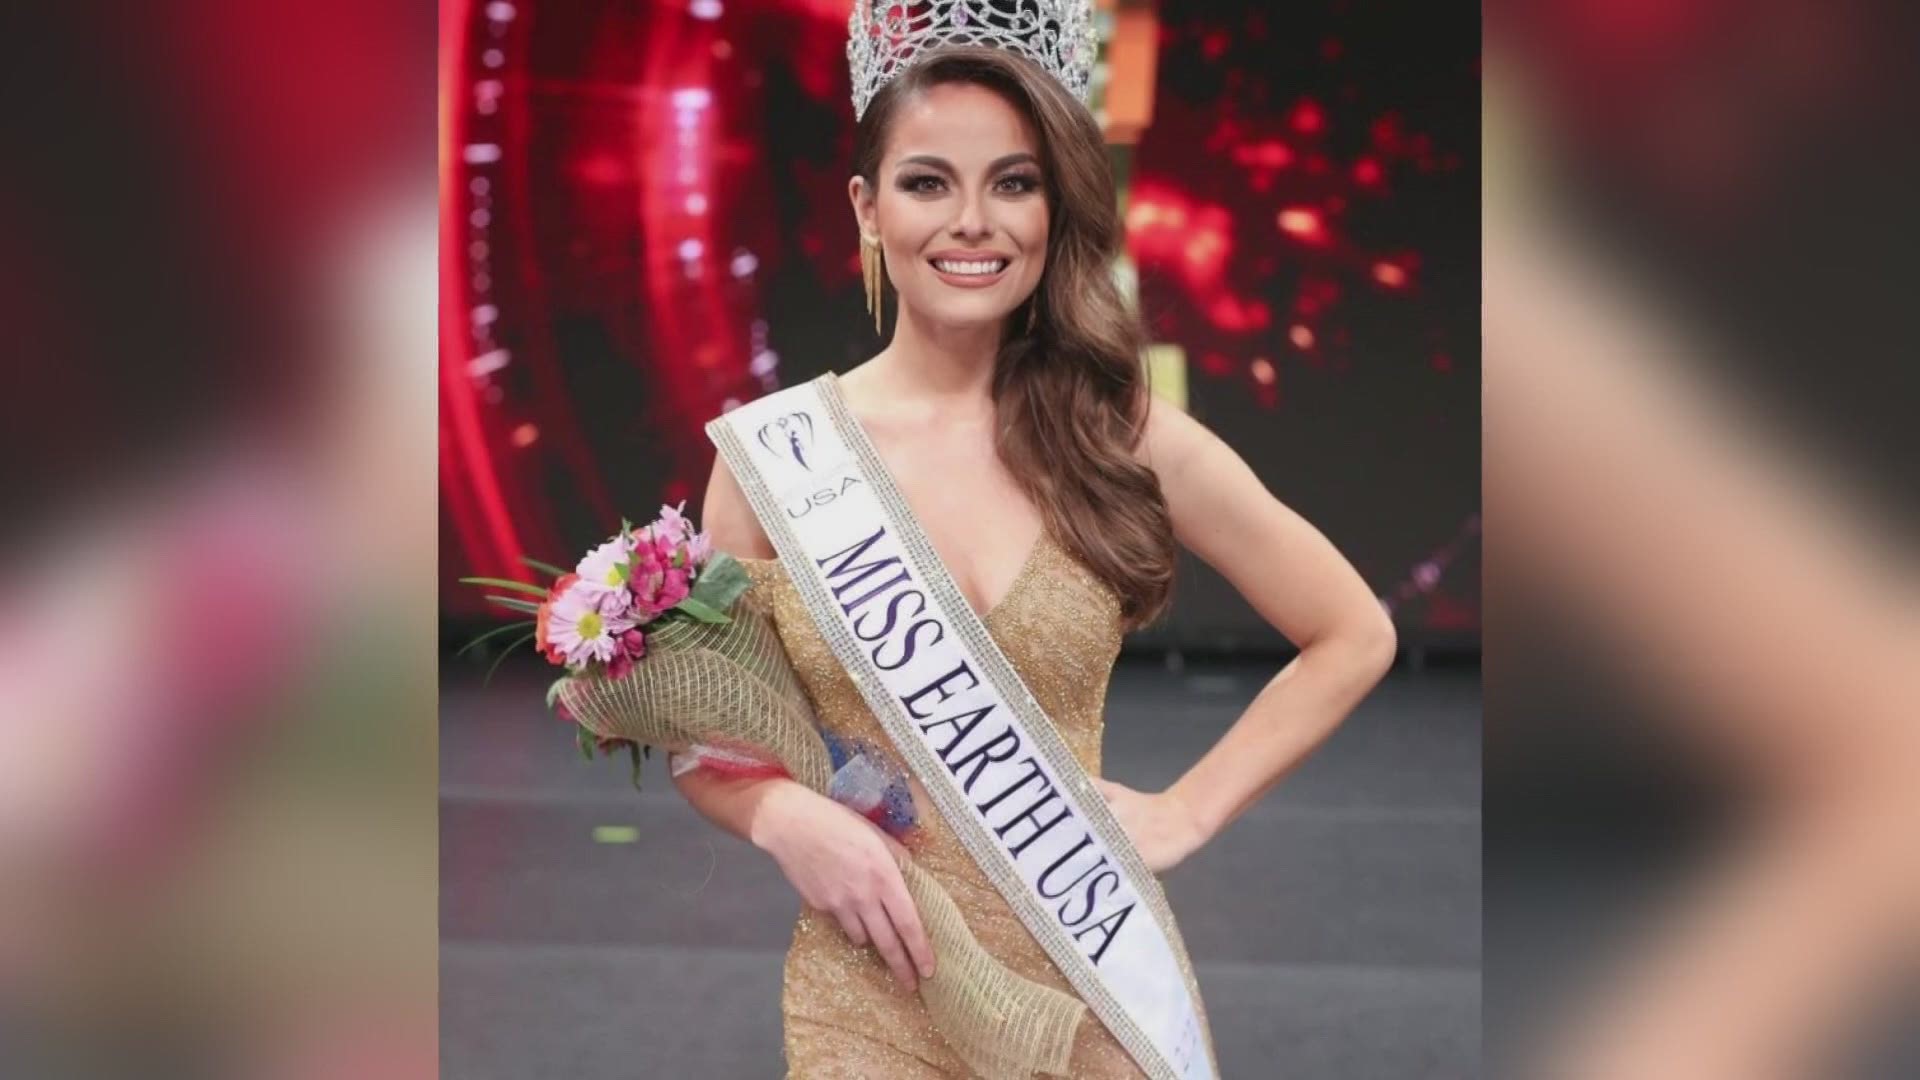 Marisa Paige Butler was crowned 'Miss Earth' back in January, and she says that much of her passion for environmentalism is due to her roots in Maine.